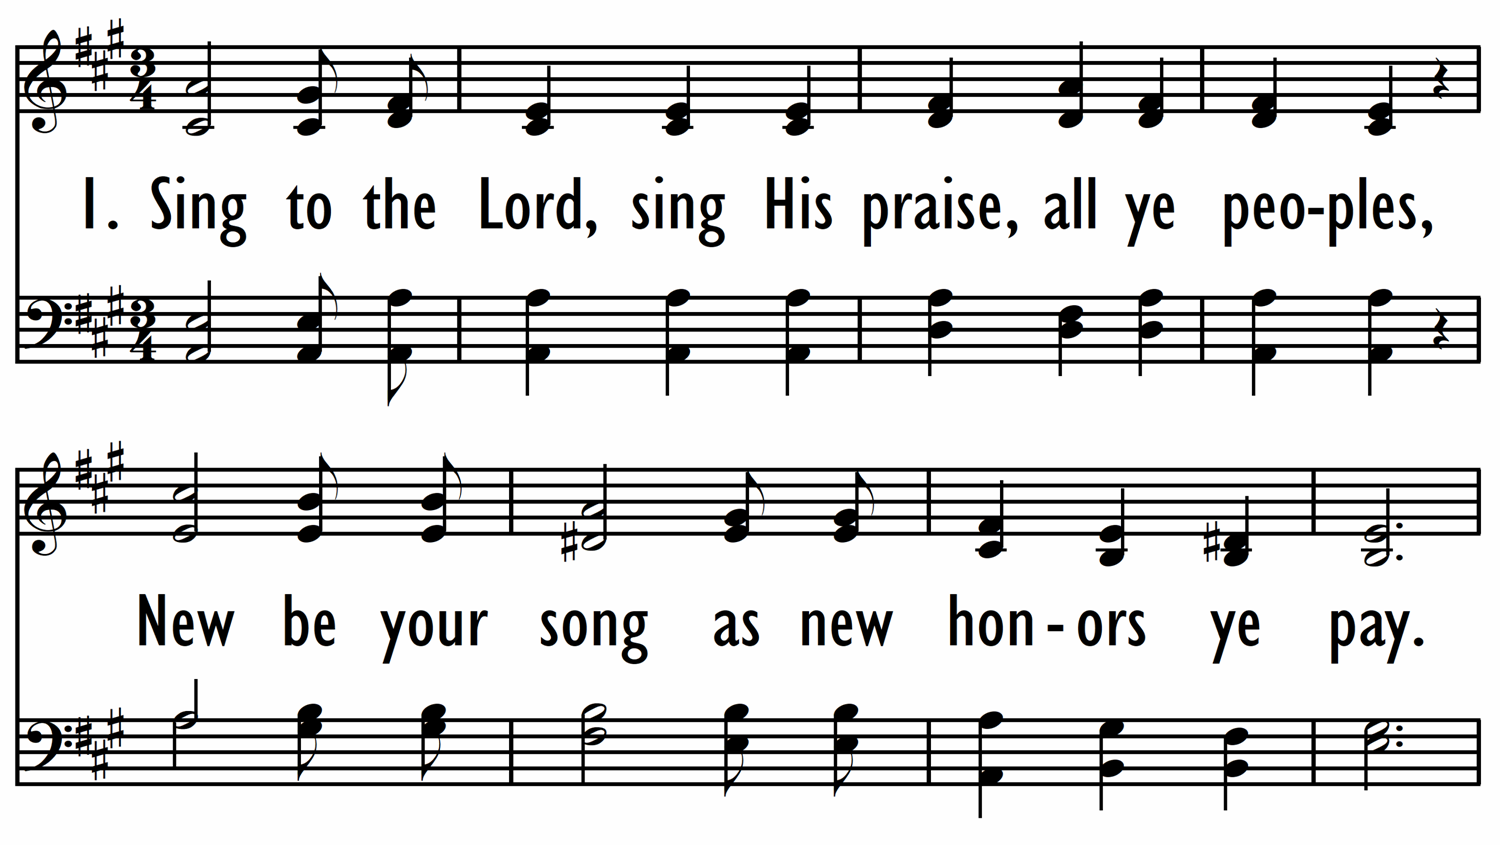 SING TO THE LORD, SING HIS PRAISE-ppt